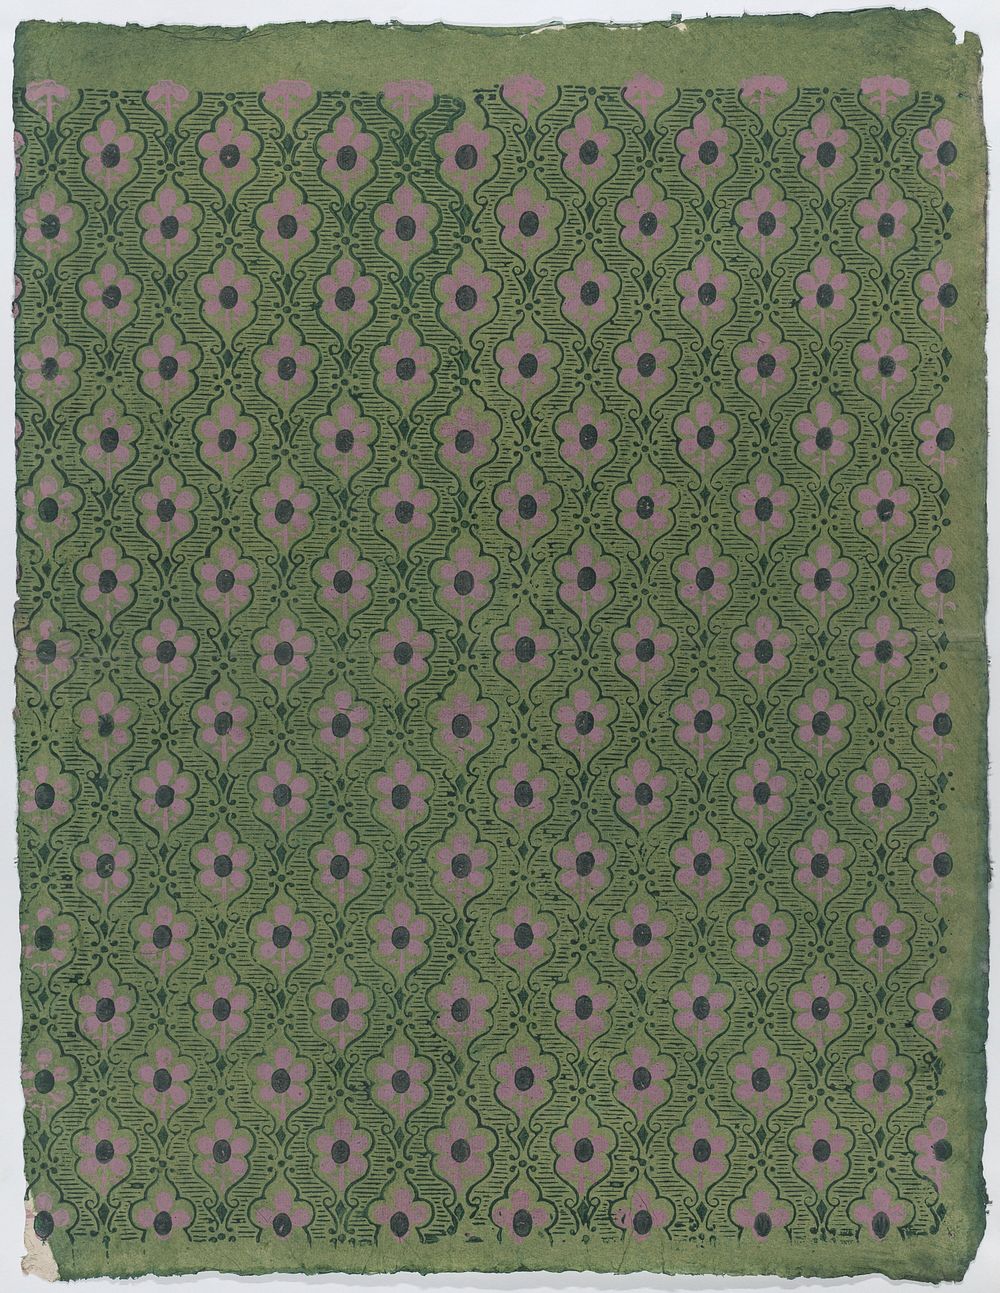 Sheet with overall pink floral pattern on green background